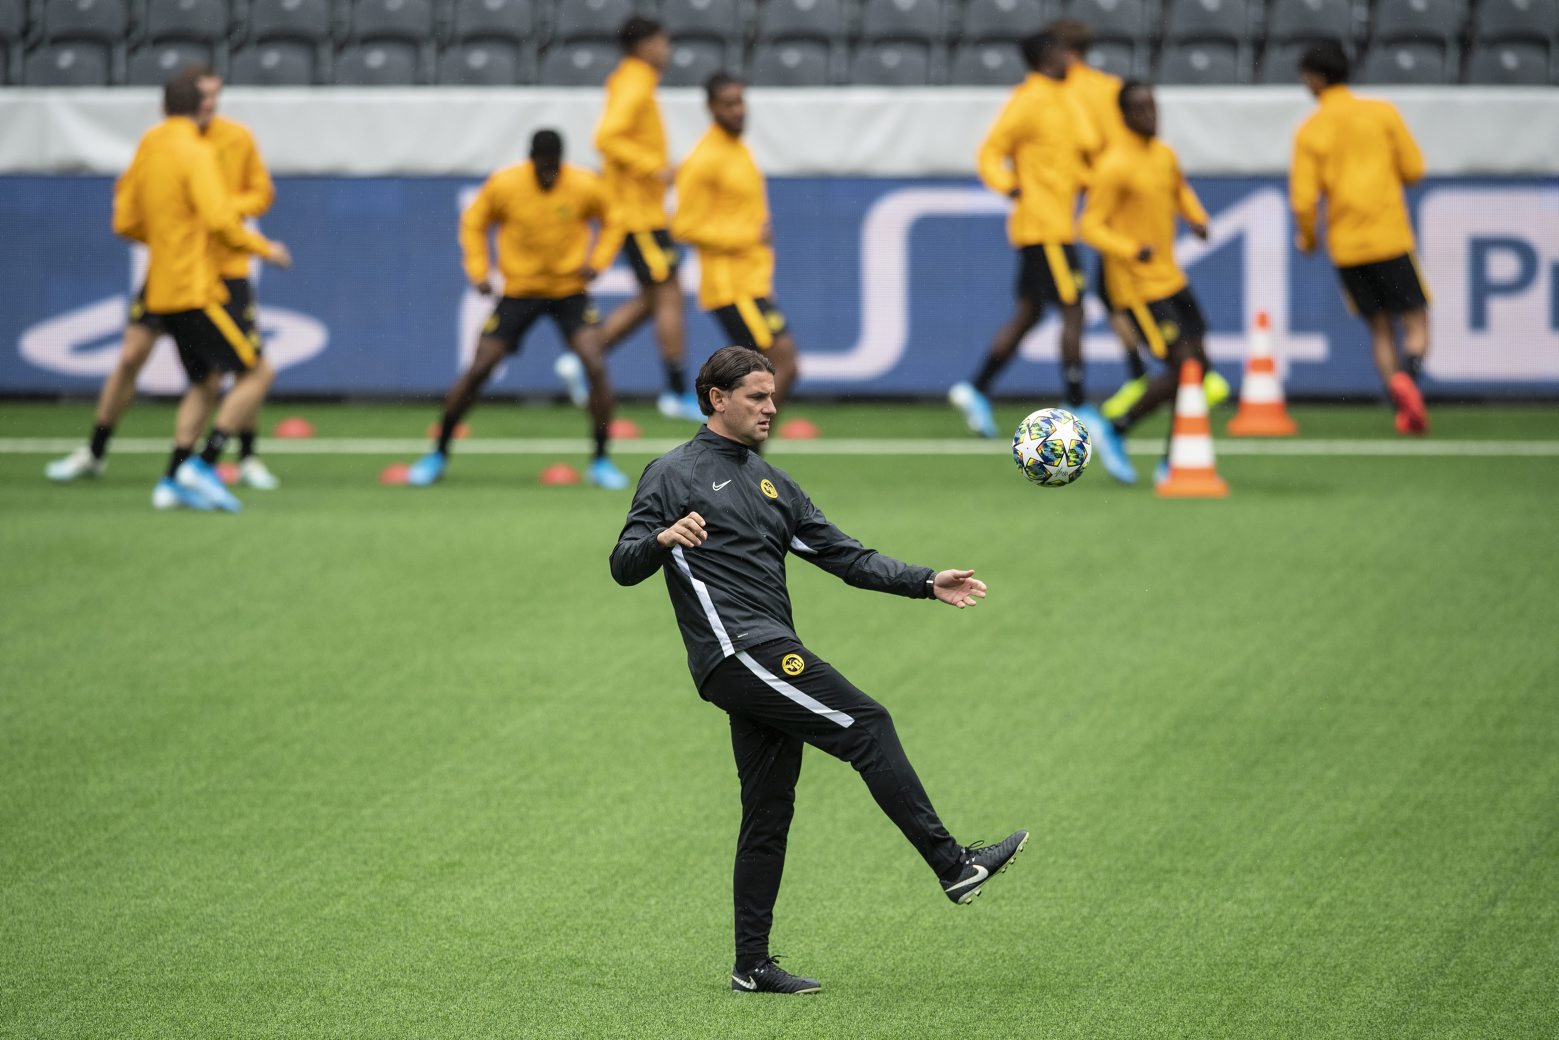 Young Boys' head coach Gerardo Seoane in action during a training session one day prior to the UEFA Champions League playoff match between Switzerland's BSC Young Boys and SerbiaÕs Red Star Belgrad, in the Stade de Suisse Stadium in Bern, Switzerland, on Tuesday, August 20, 2019. (KEYSTONE/Peter Schneider) SWITZERLAND SOCCER CHAMPIONS LEAGUE YB BELGRAD